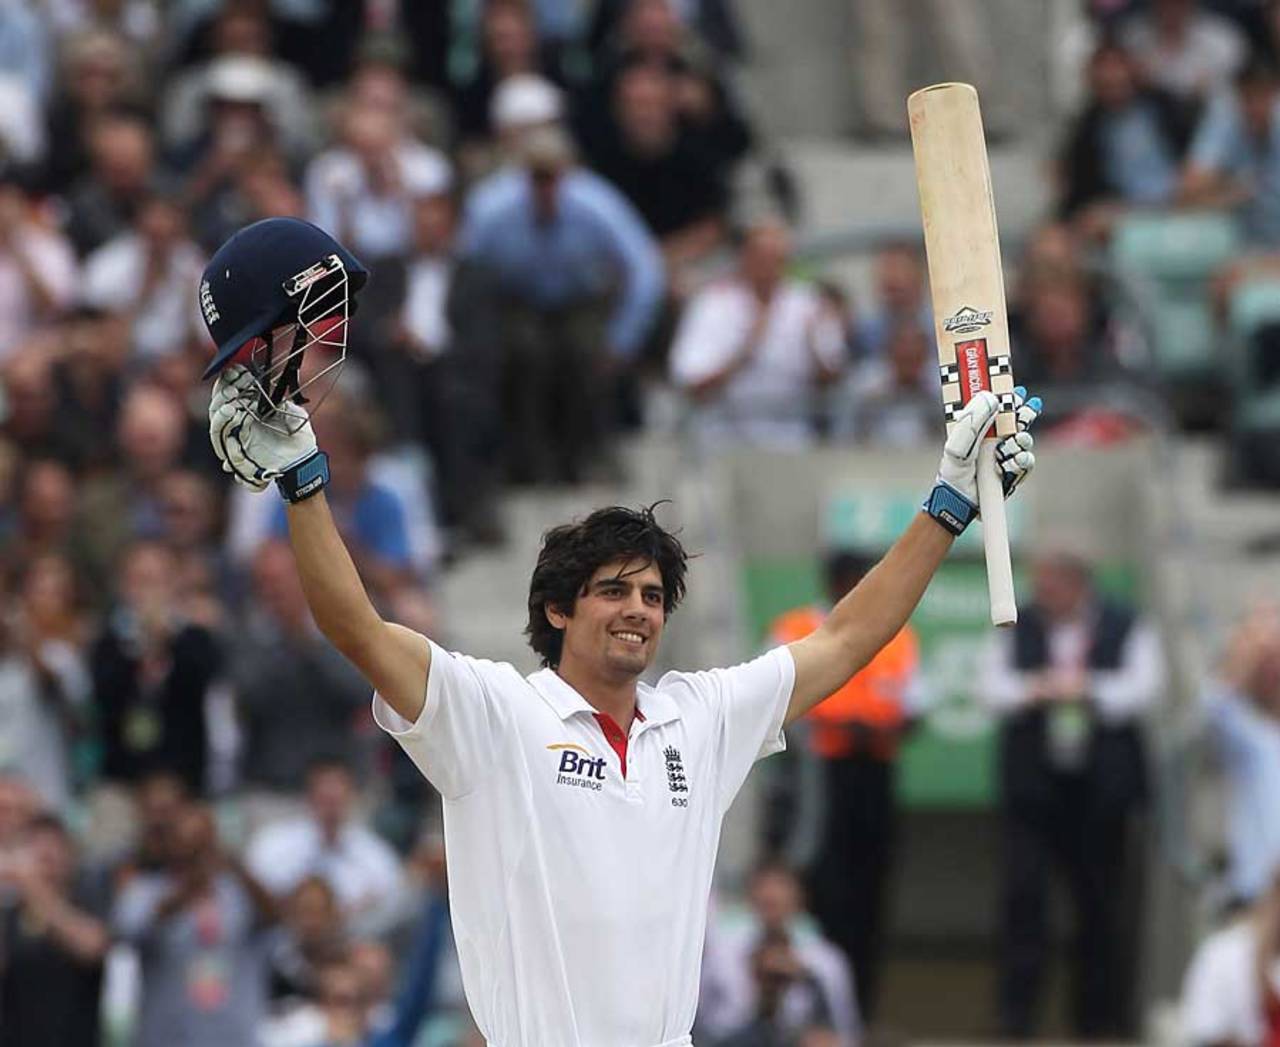 Alastair Cook celebrates his 13th Test century and his most important, England v Pakistan, 3rd Test, The Oval, August 20, 2010